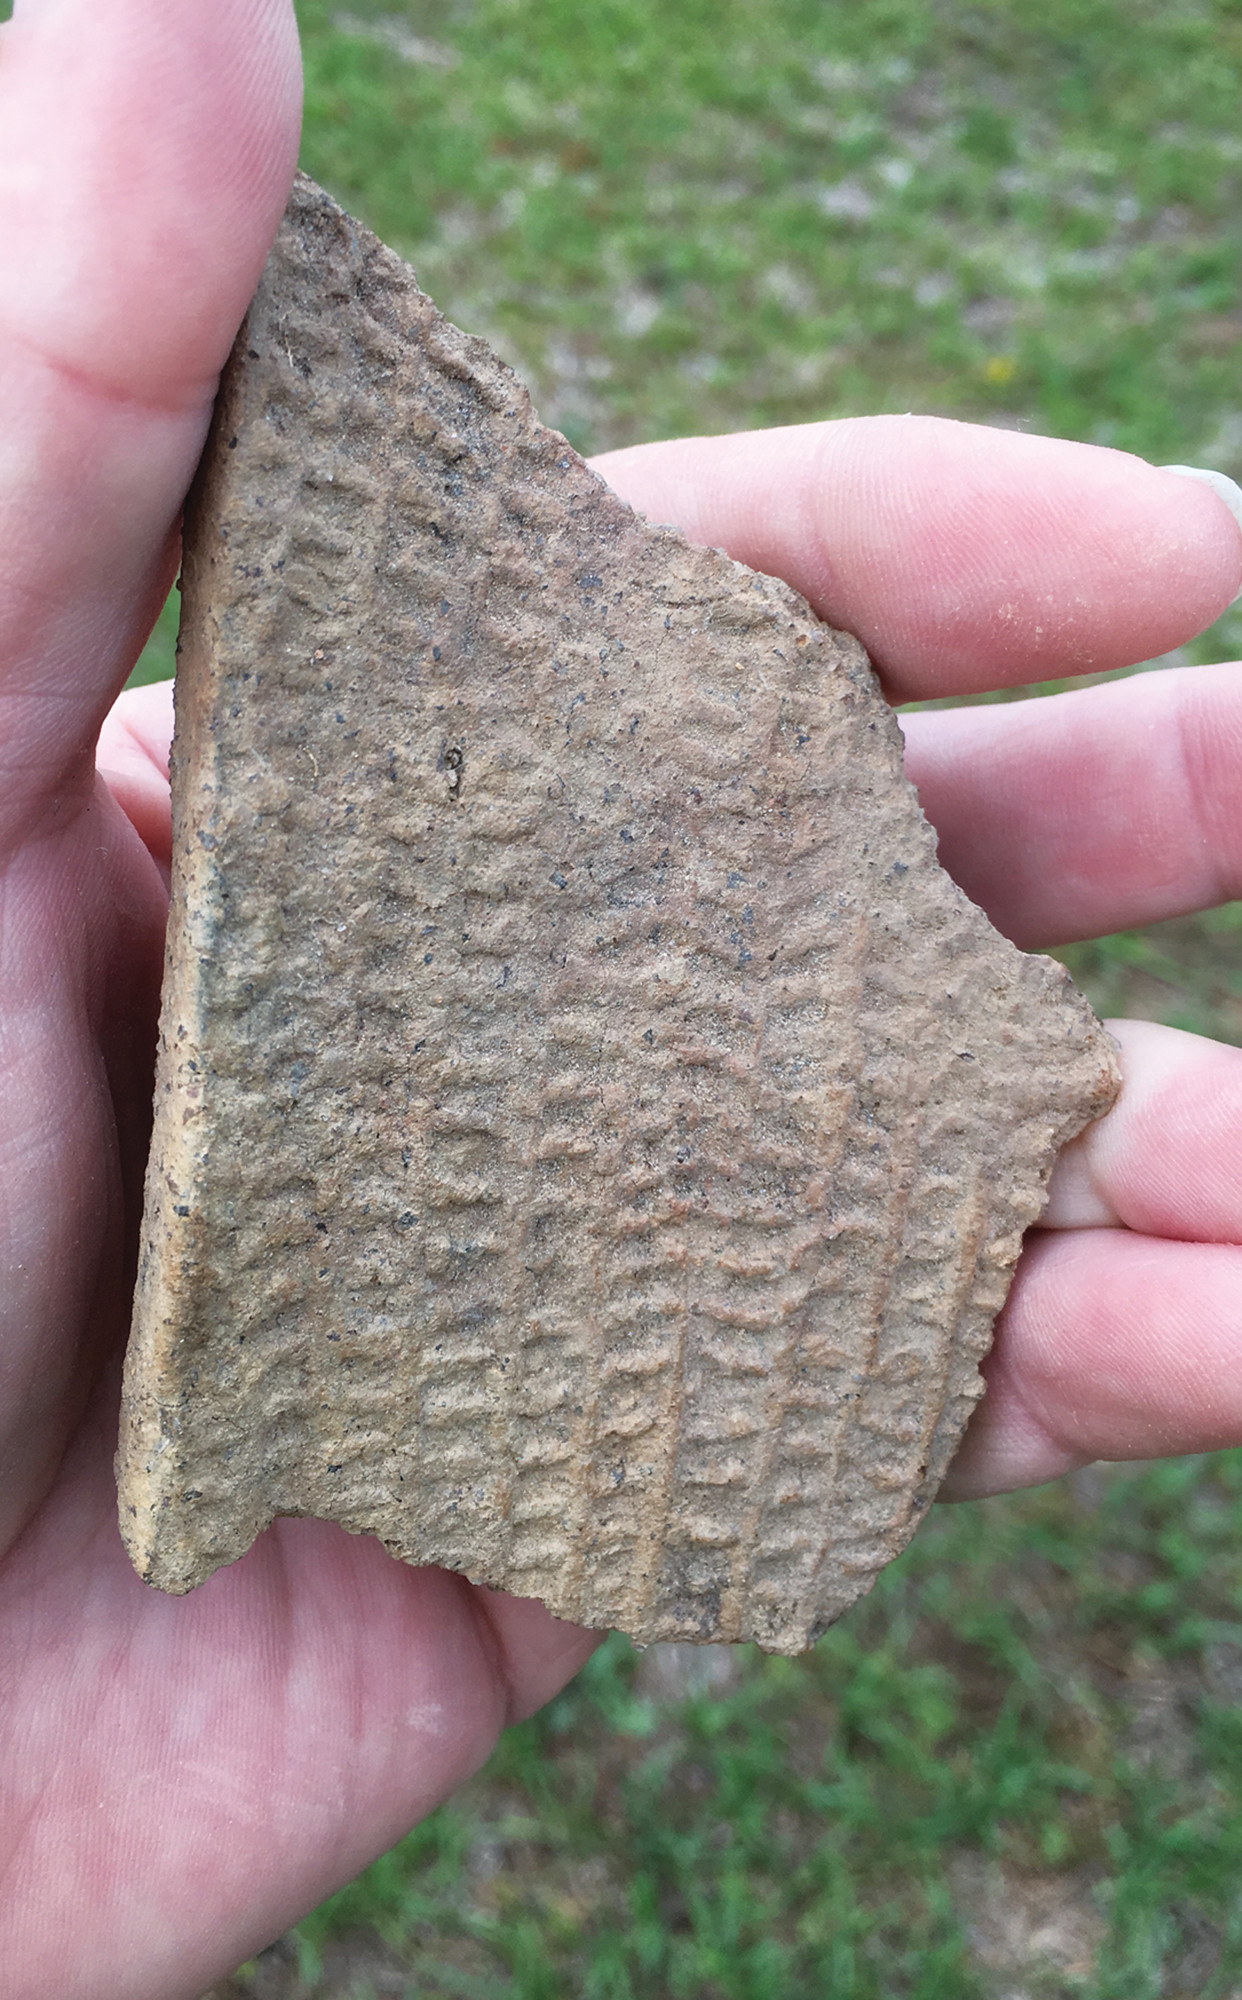 This pottery shard is marked with a small ear of corn. The smooth edge near the thumb is the finished lip of a jar or vessel of some type.